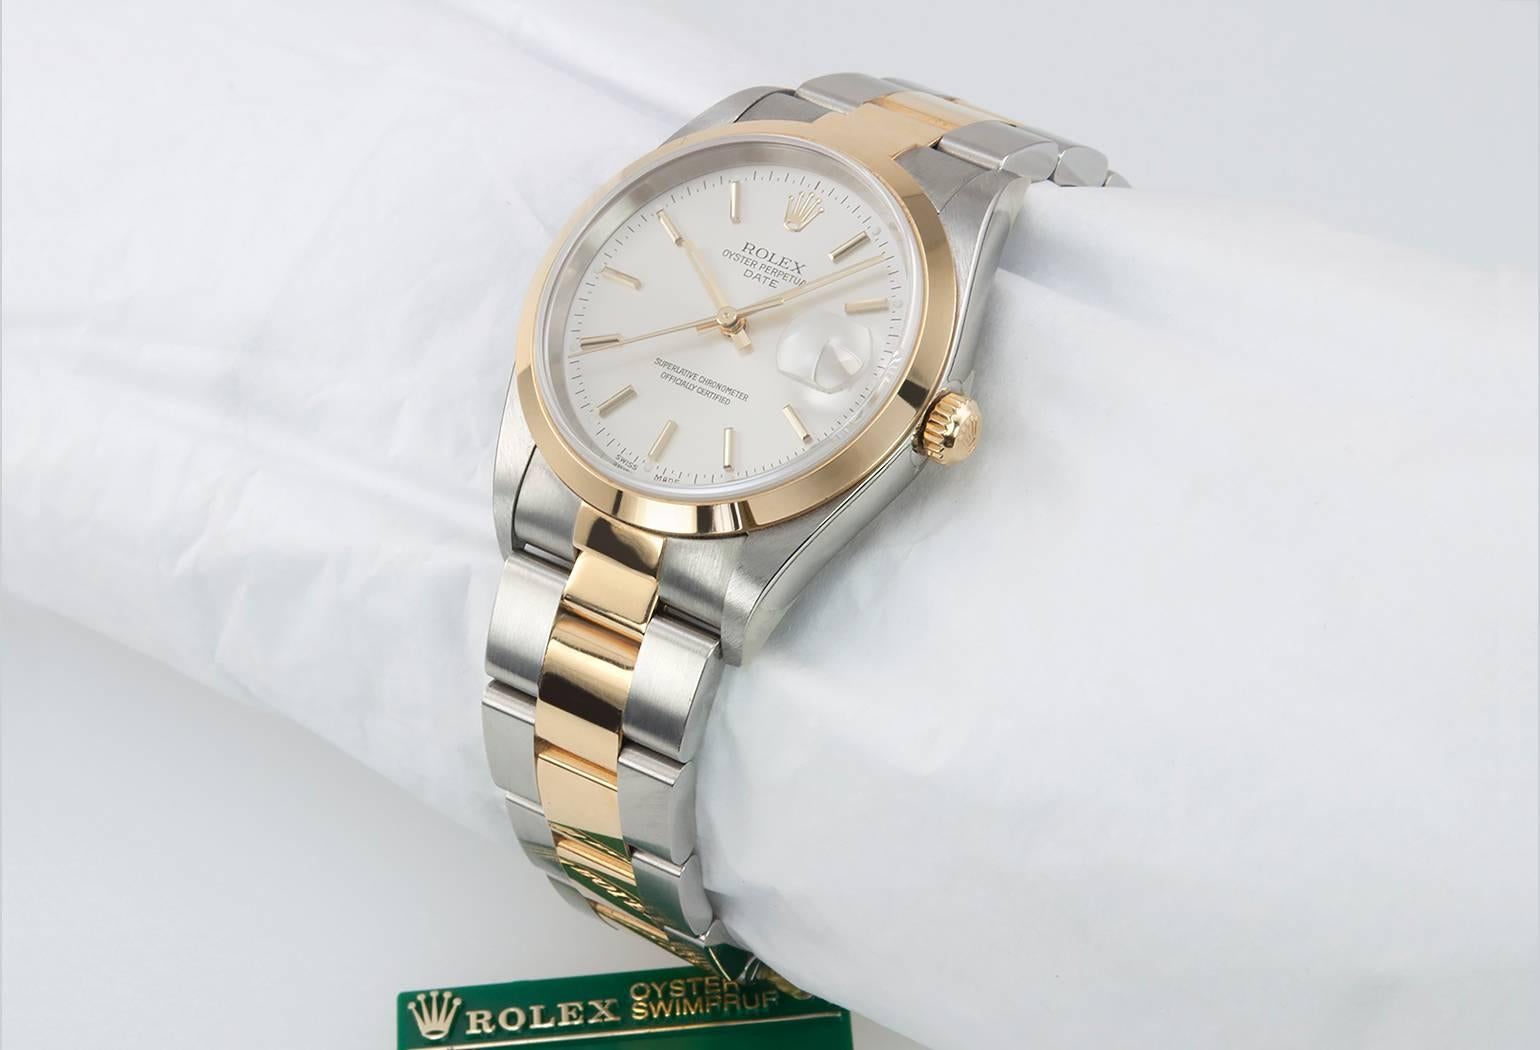 Rolex Oyster Date two-tone wristwatch in 18 karat yellow gold and stainless steel, reference 78353. This classic Rolex features an 18 karat yellow gold smooth bezel with a yellow gold locking crown, a white dial, and an 18 karat yellow gold and